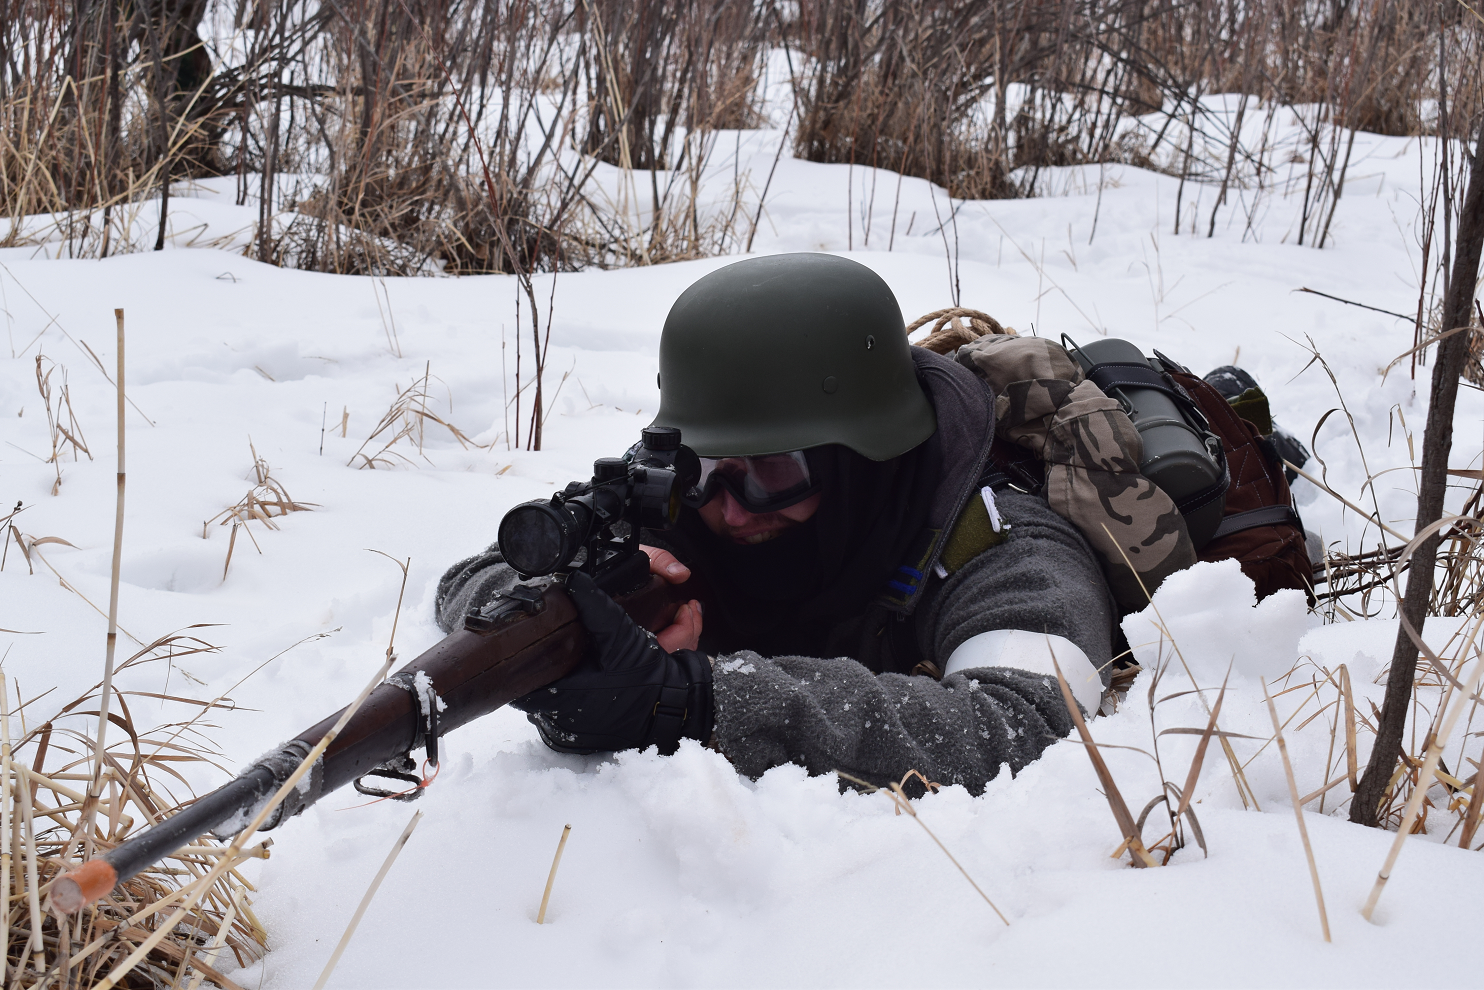 Airsoft player lying prone in the snow, aiming with a scoped rifle, wearing winter camouflage and protective gear.